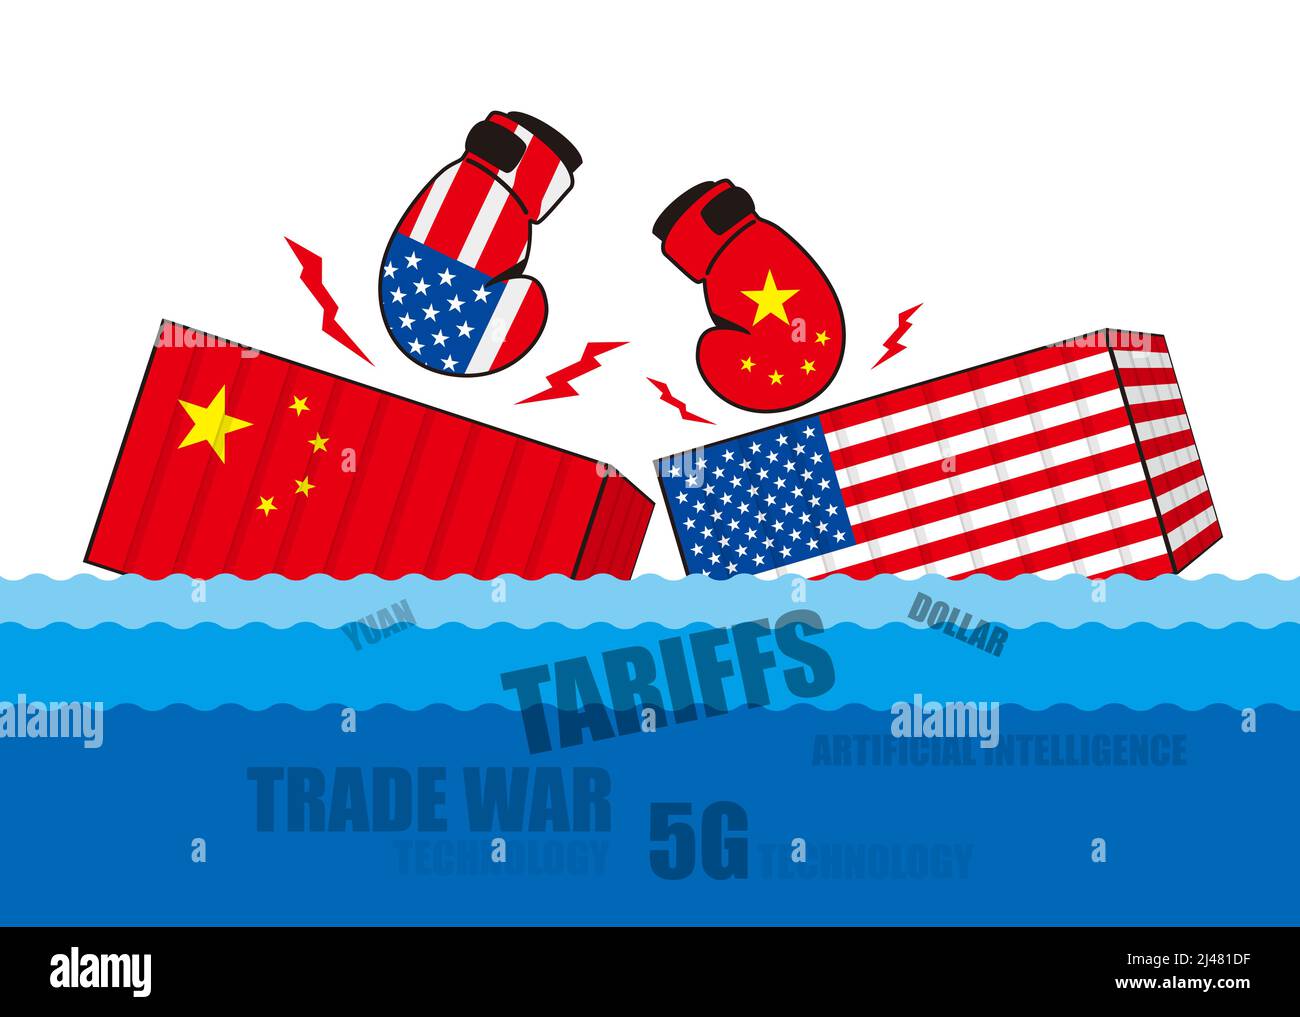 Trade war of China and United States,Boxing sinks the trade containers Stock Vector